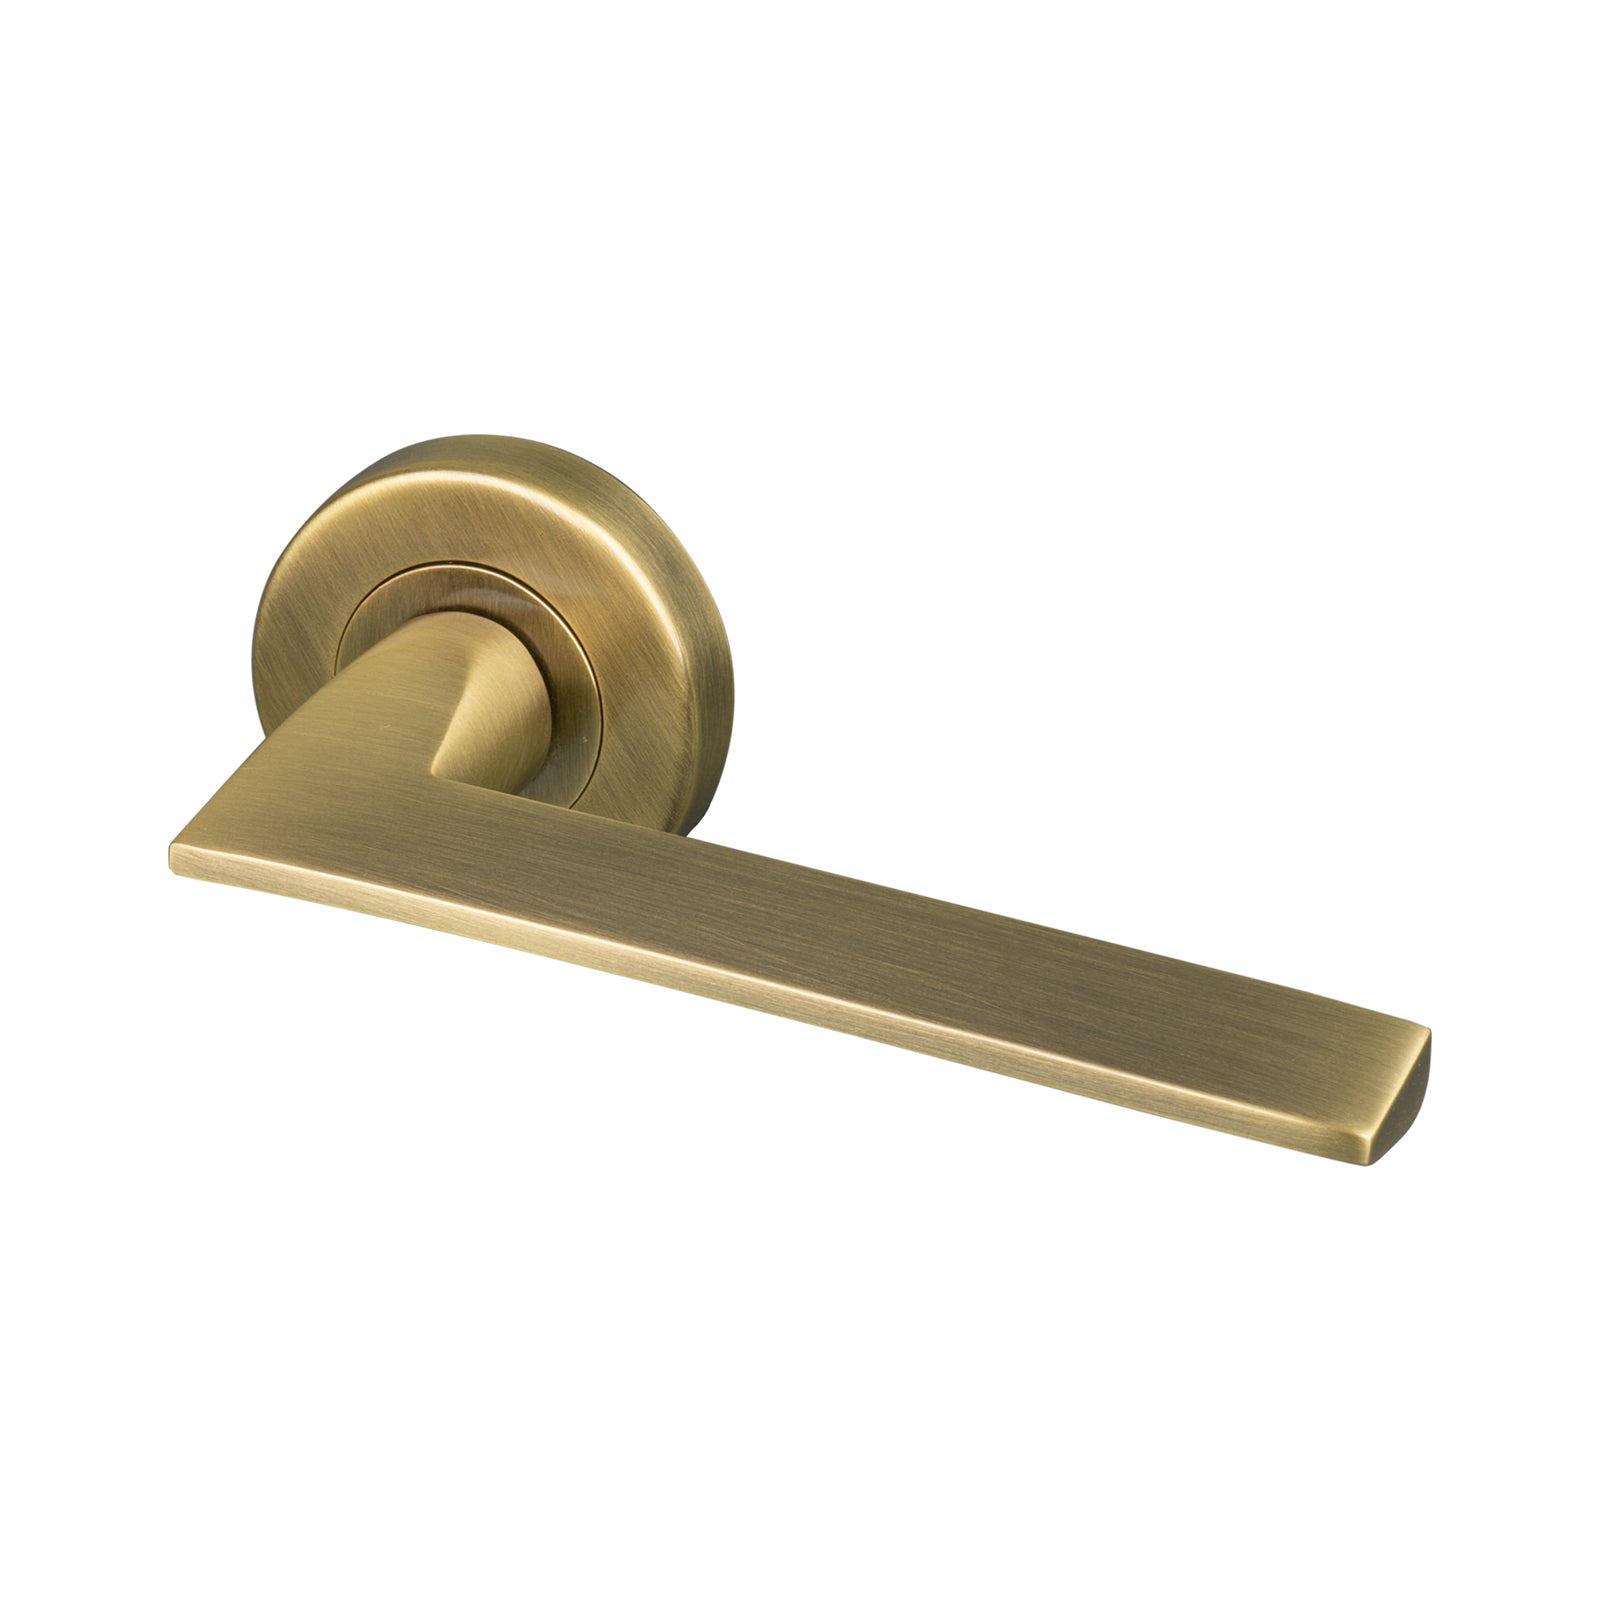 aged brass pyramid round rose door handle, quality lever on rose handle SHOW